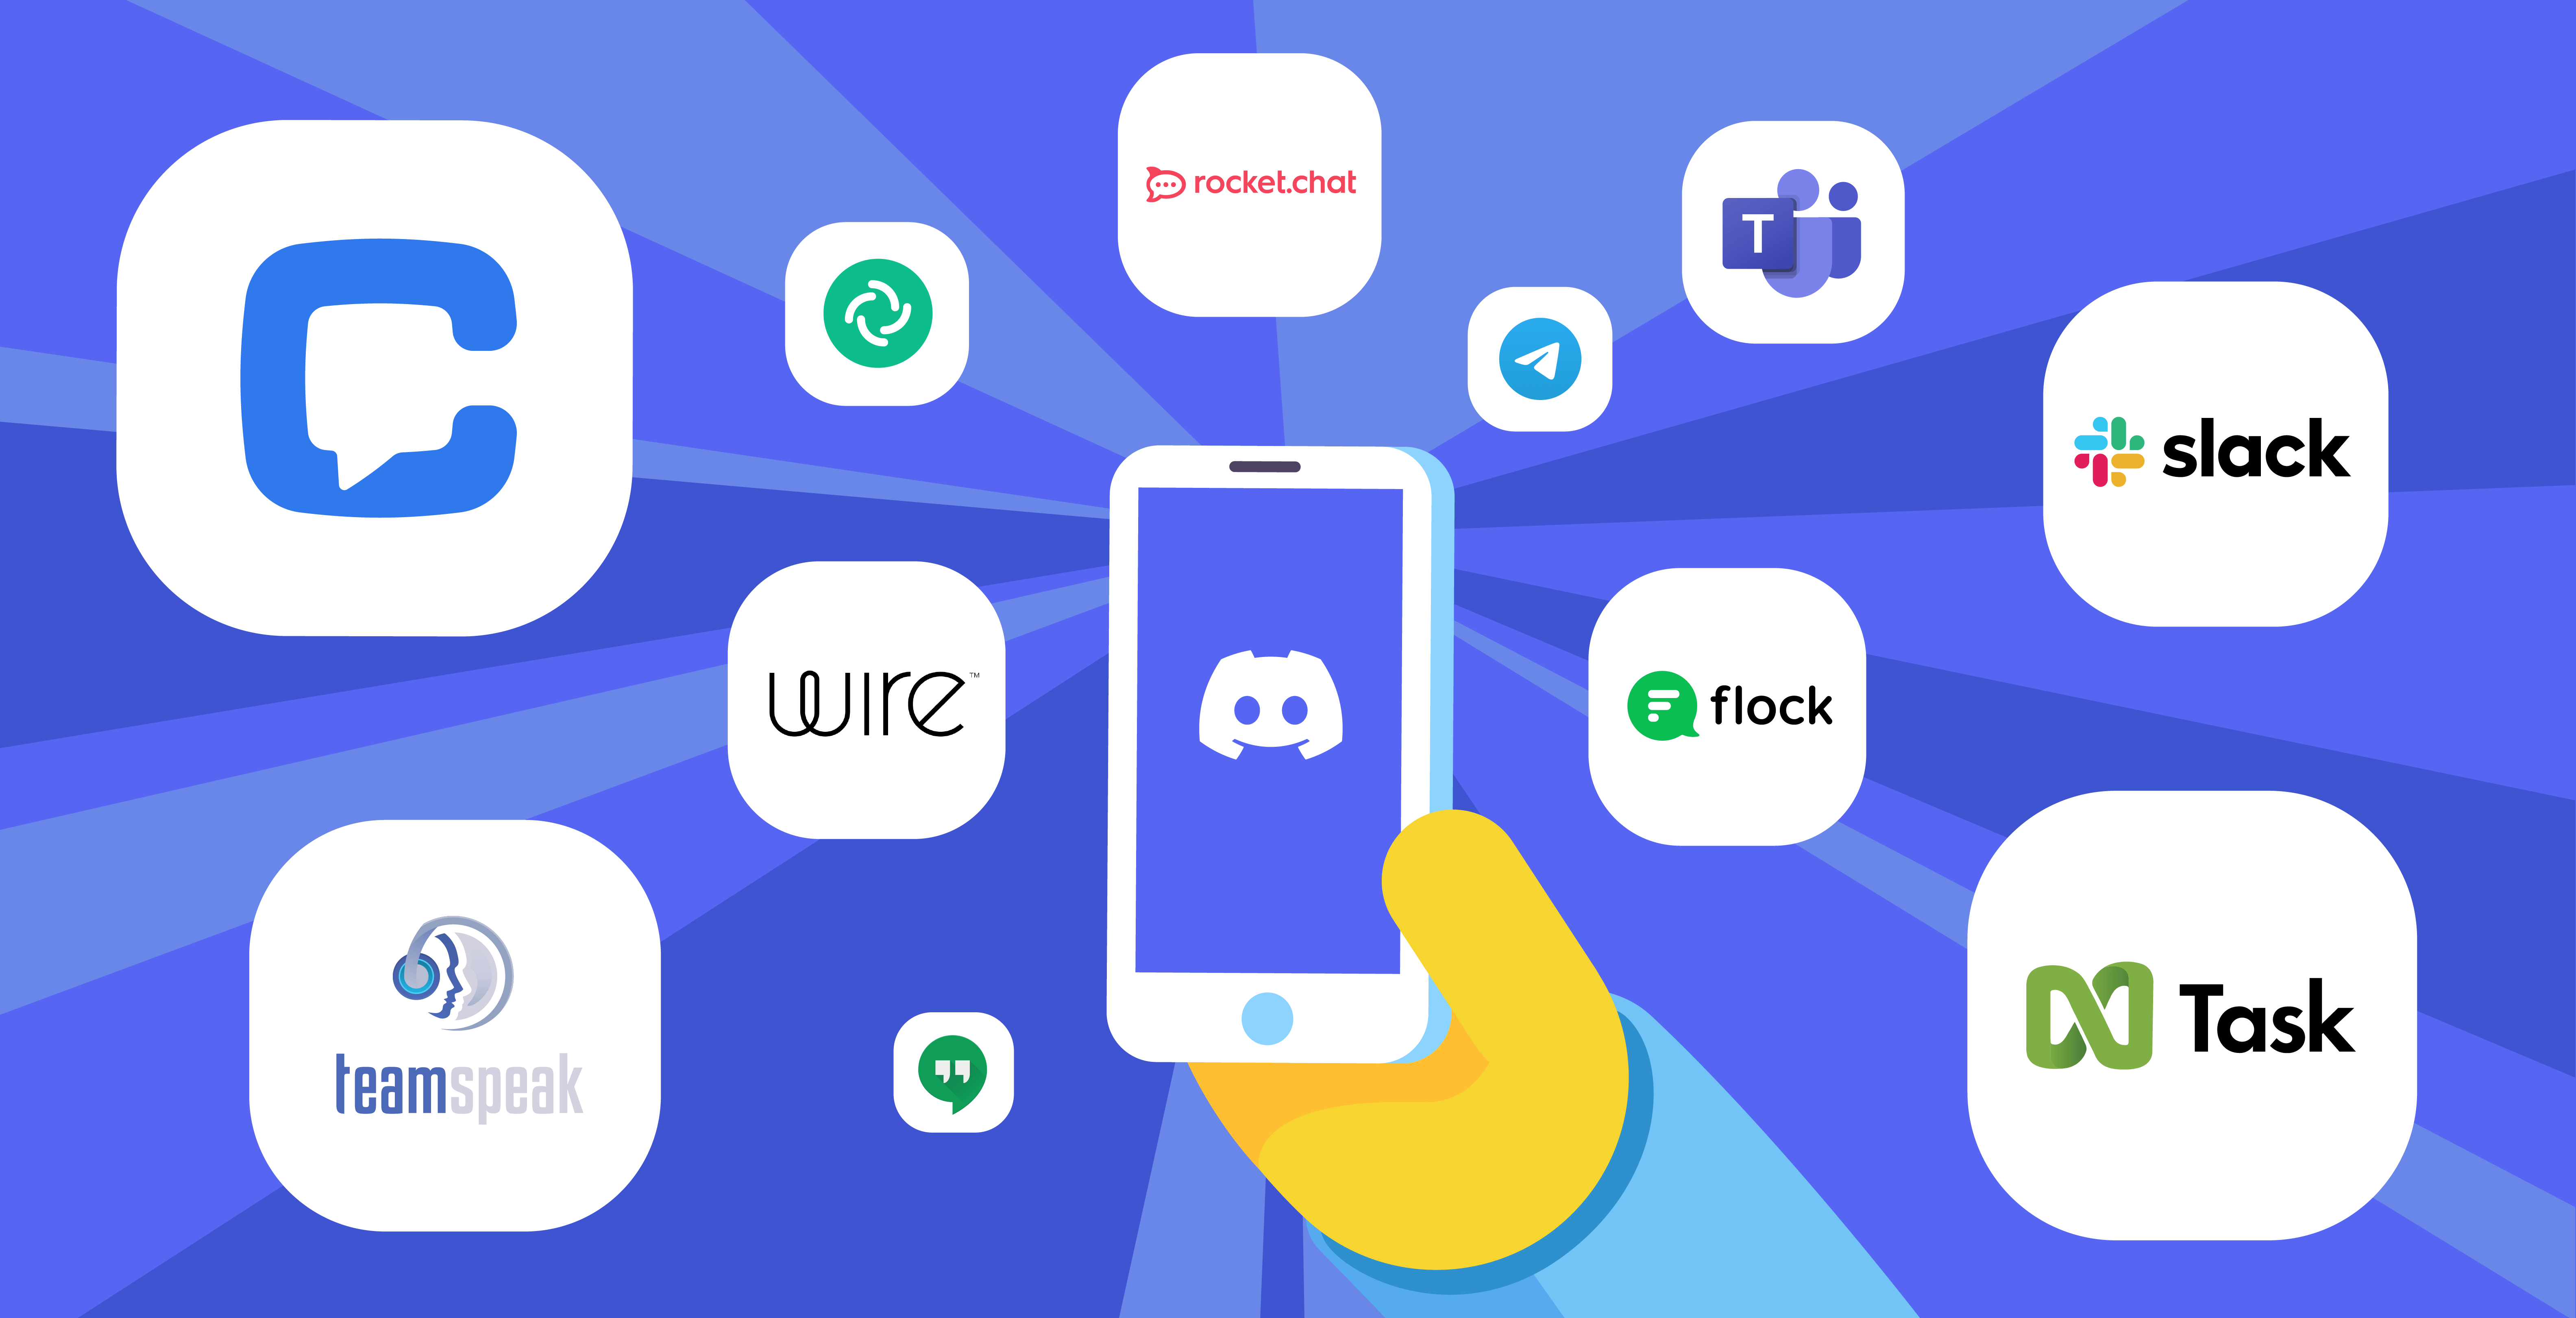 Discord is giving voice channels their own text-based chat rooms